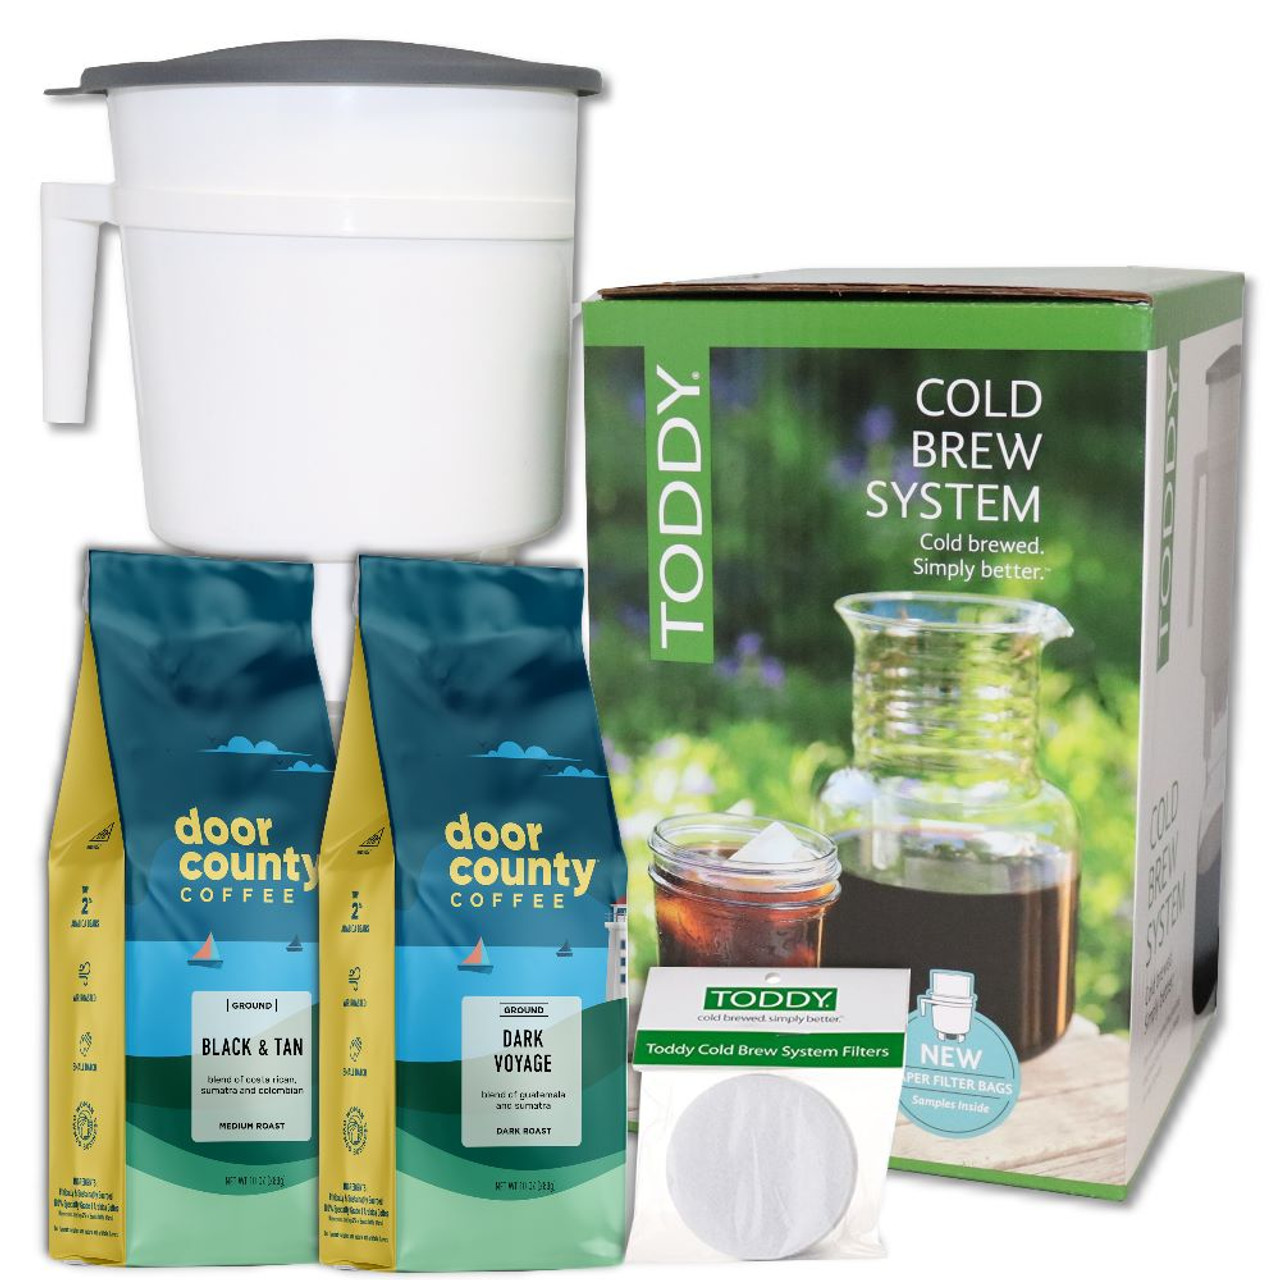 Toddy Cold Brew System Filter Replacements